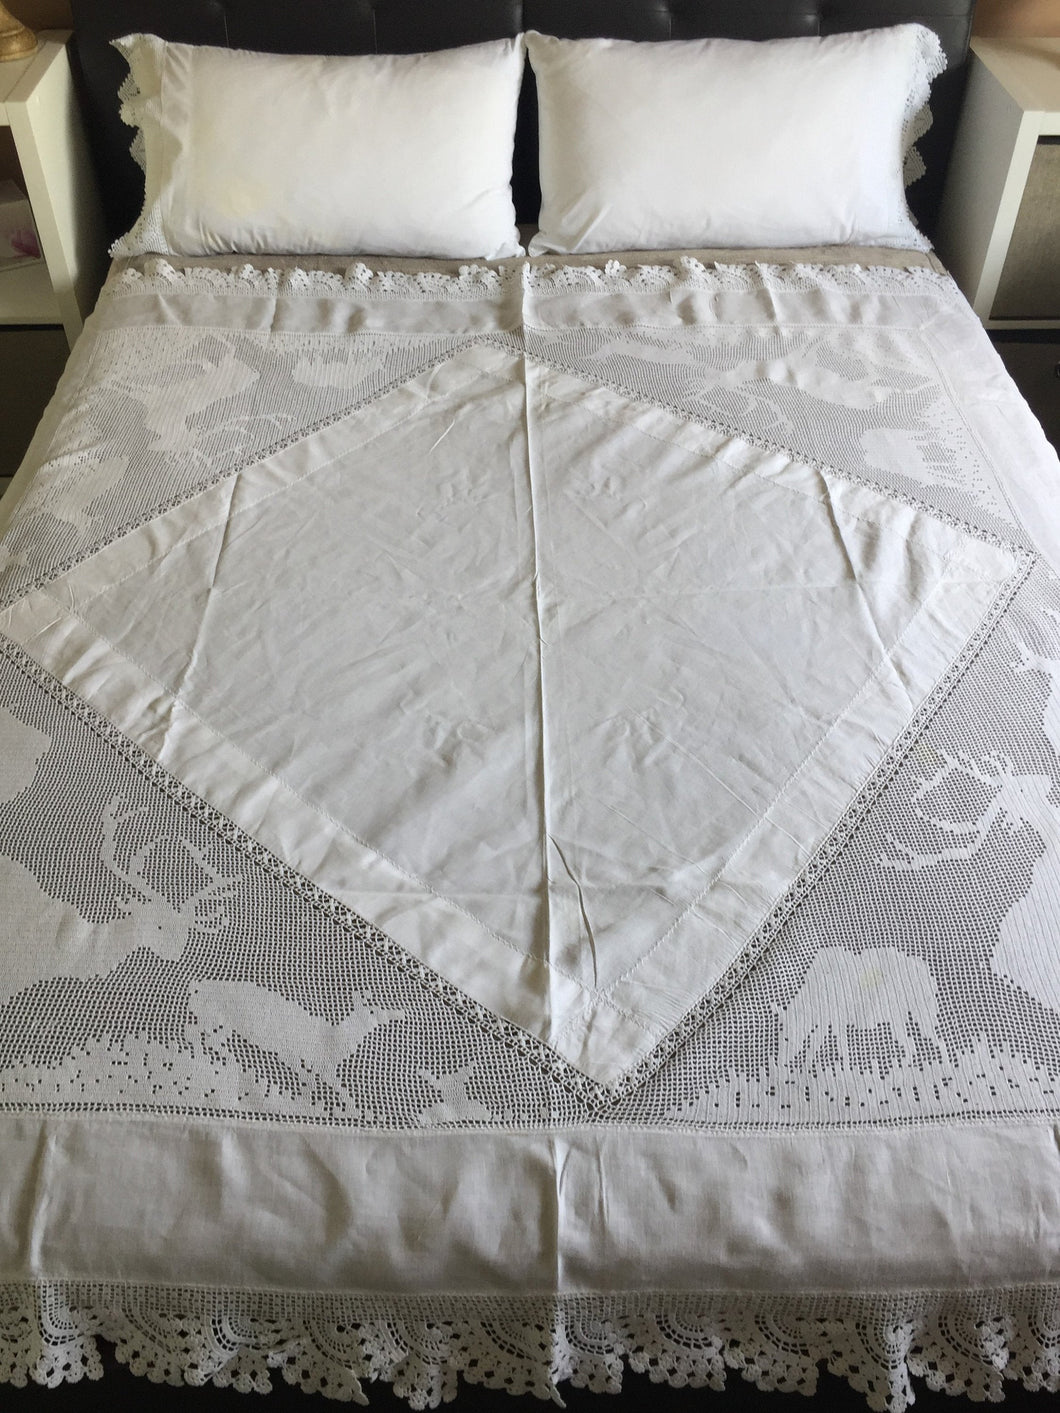 Stag Lace Antique Linen Bed Cover with Filet Crochet Corners and Edging, a Design from 